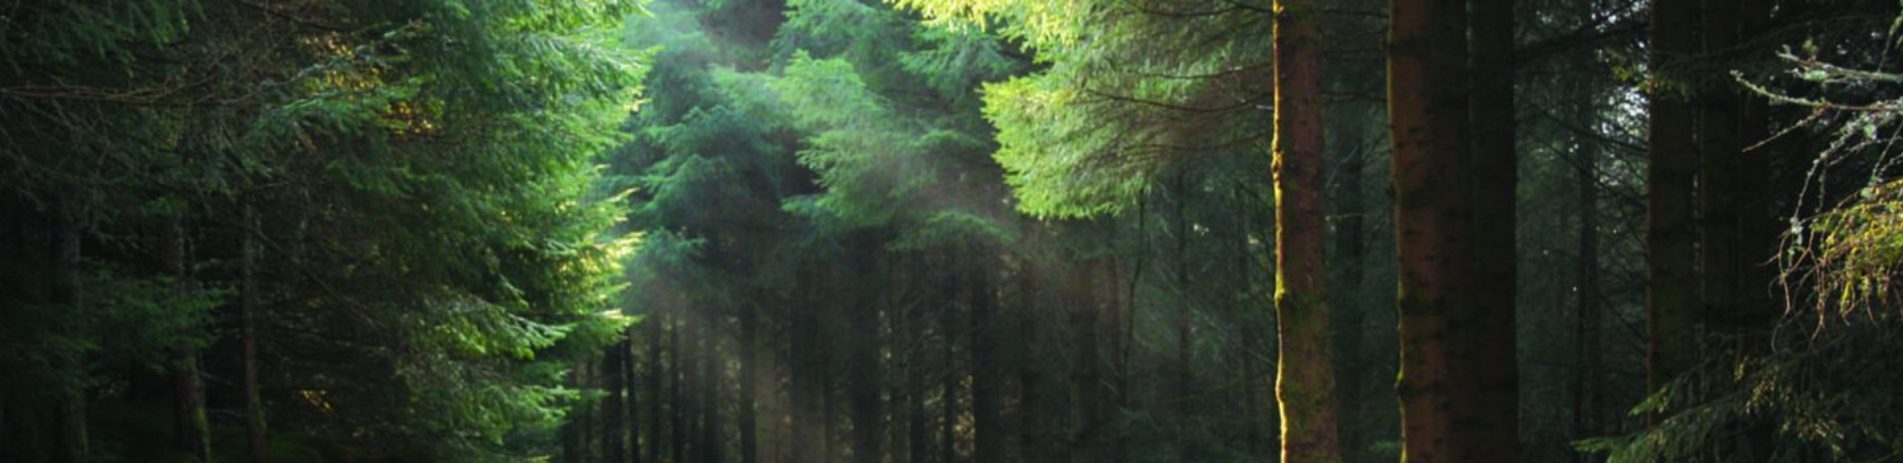 argyll-forest-coniferous-trees-with-light-penetrating-through-diagonally